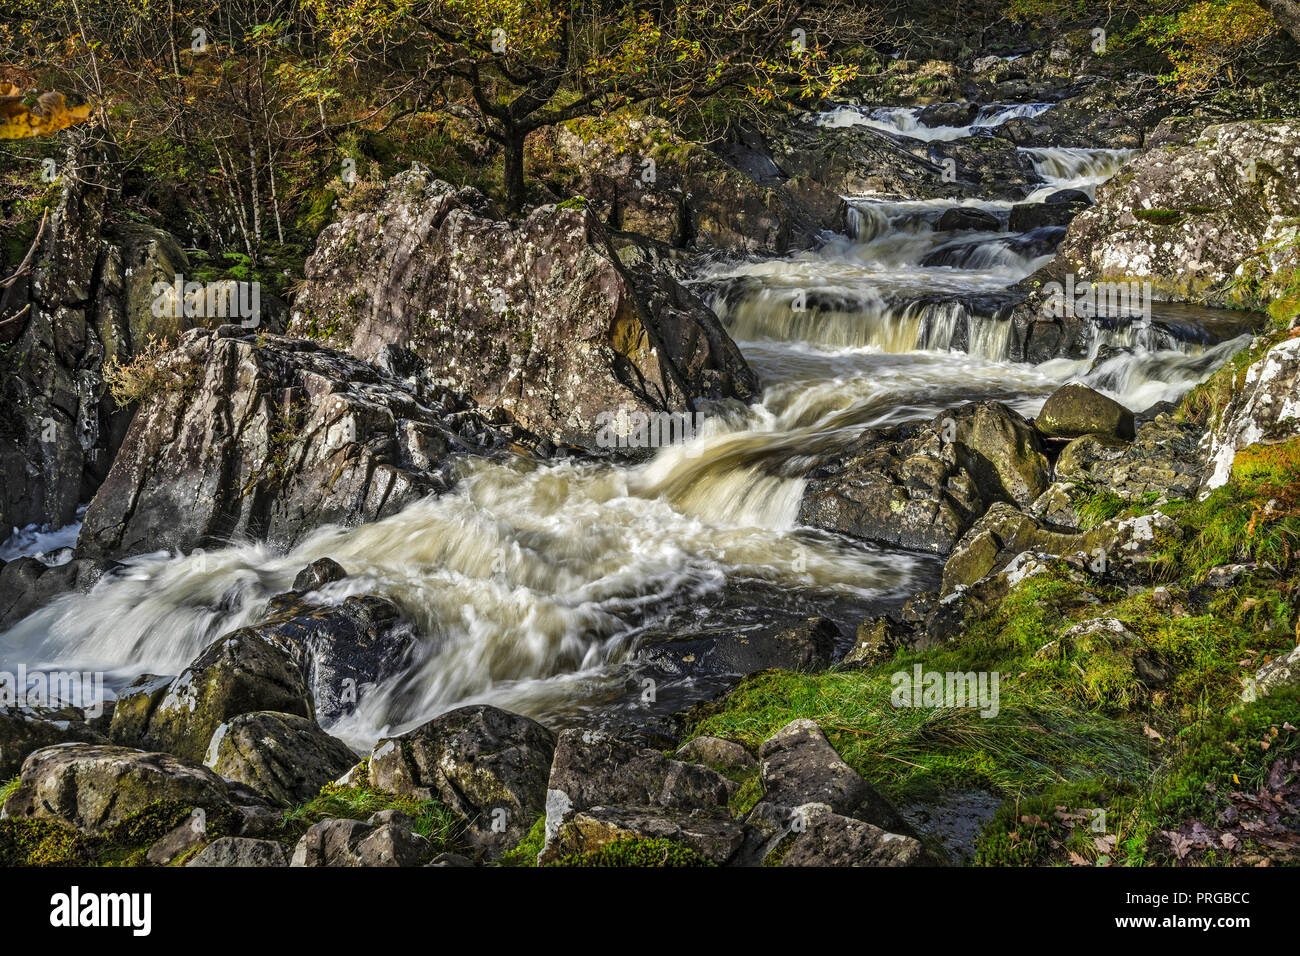 A section of the turbulent Afon (River) Gamlan flowing through the Coed Ganllwyd National Nature Reserve in the Coed-y-Brenin Forest Stock Photo